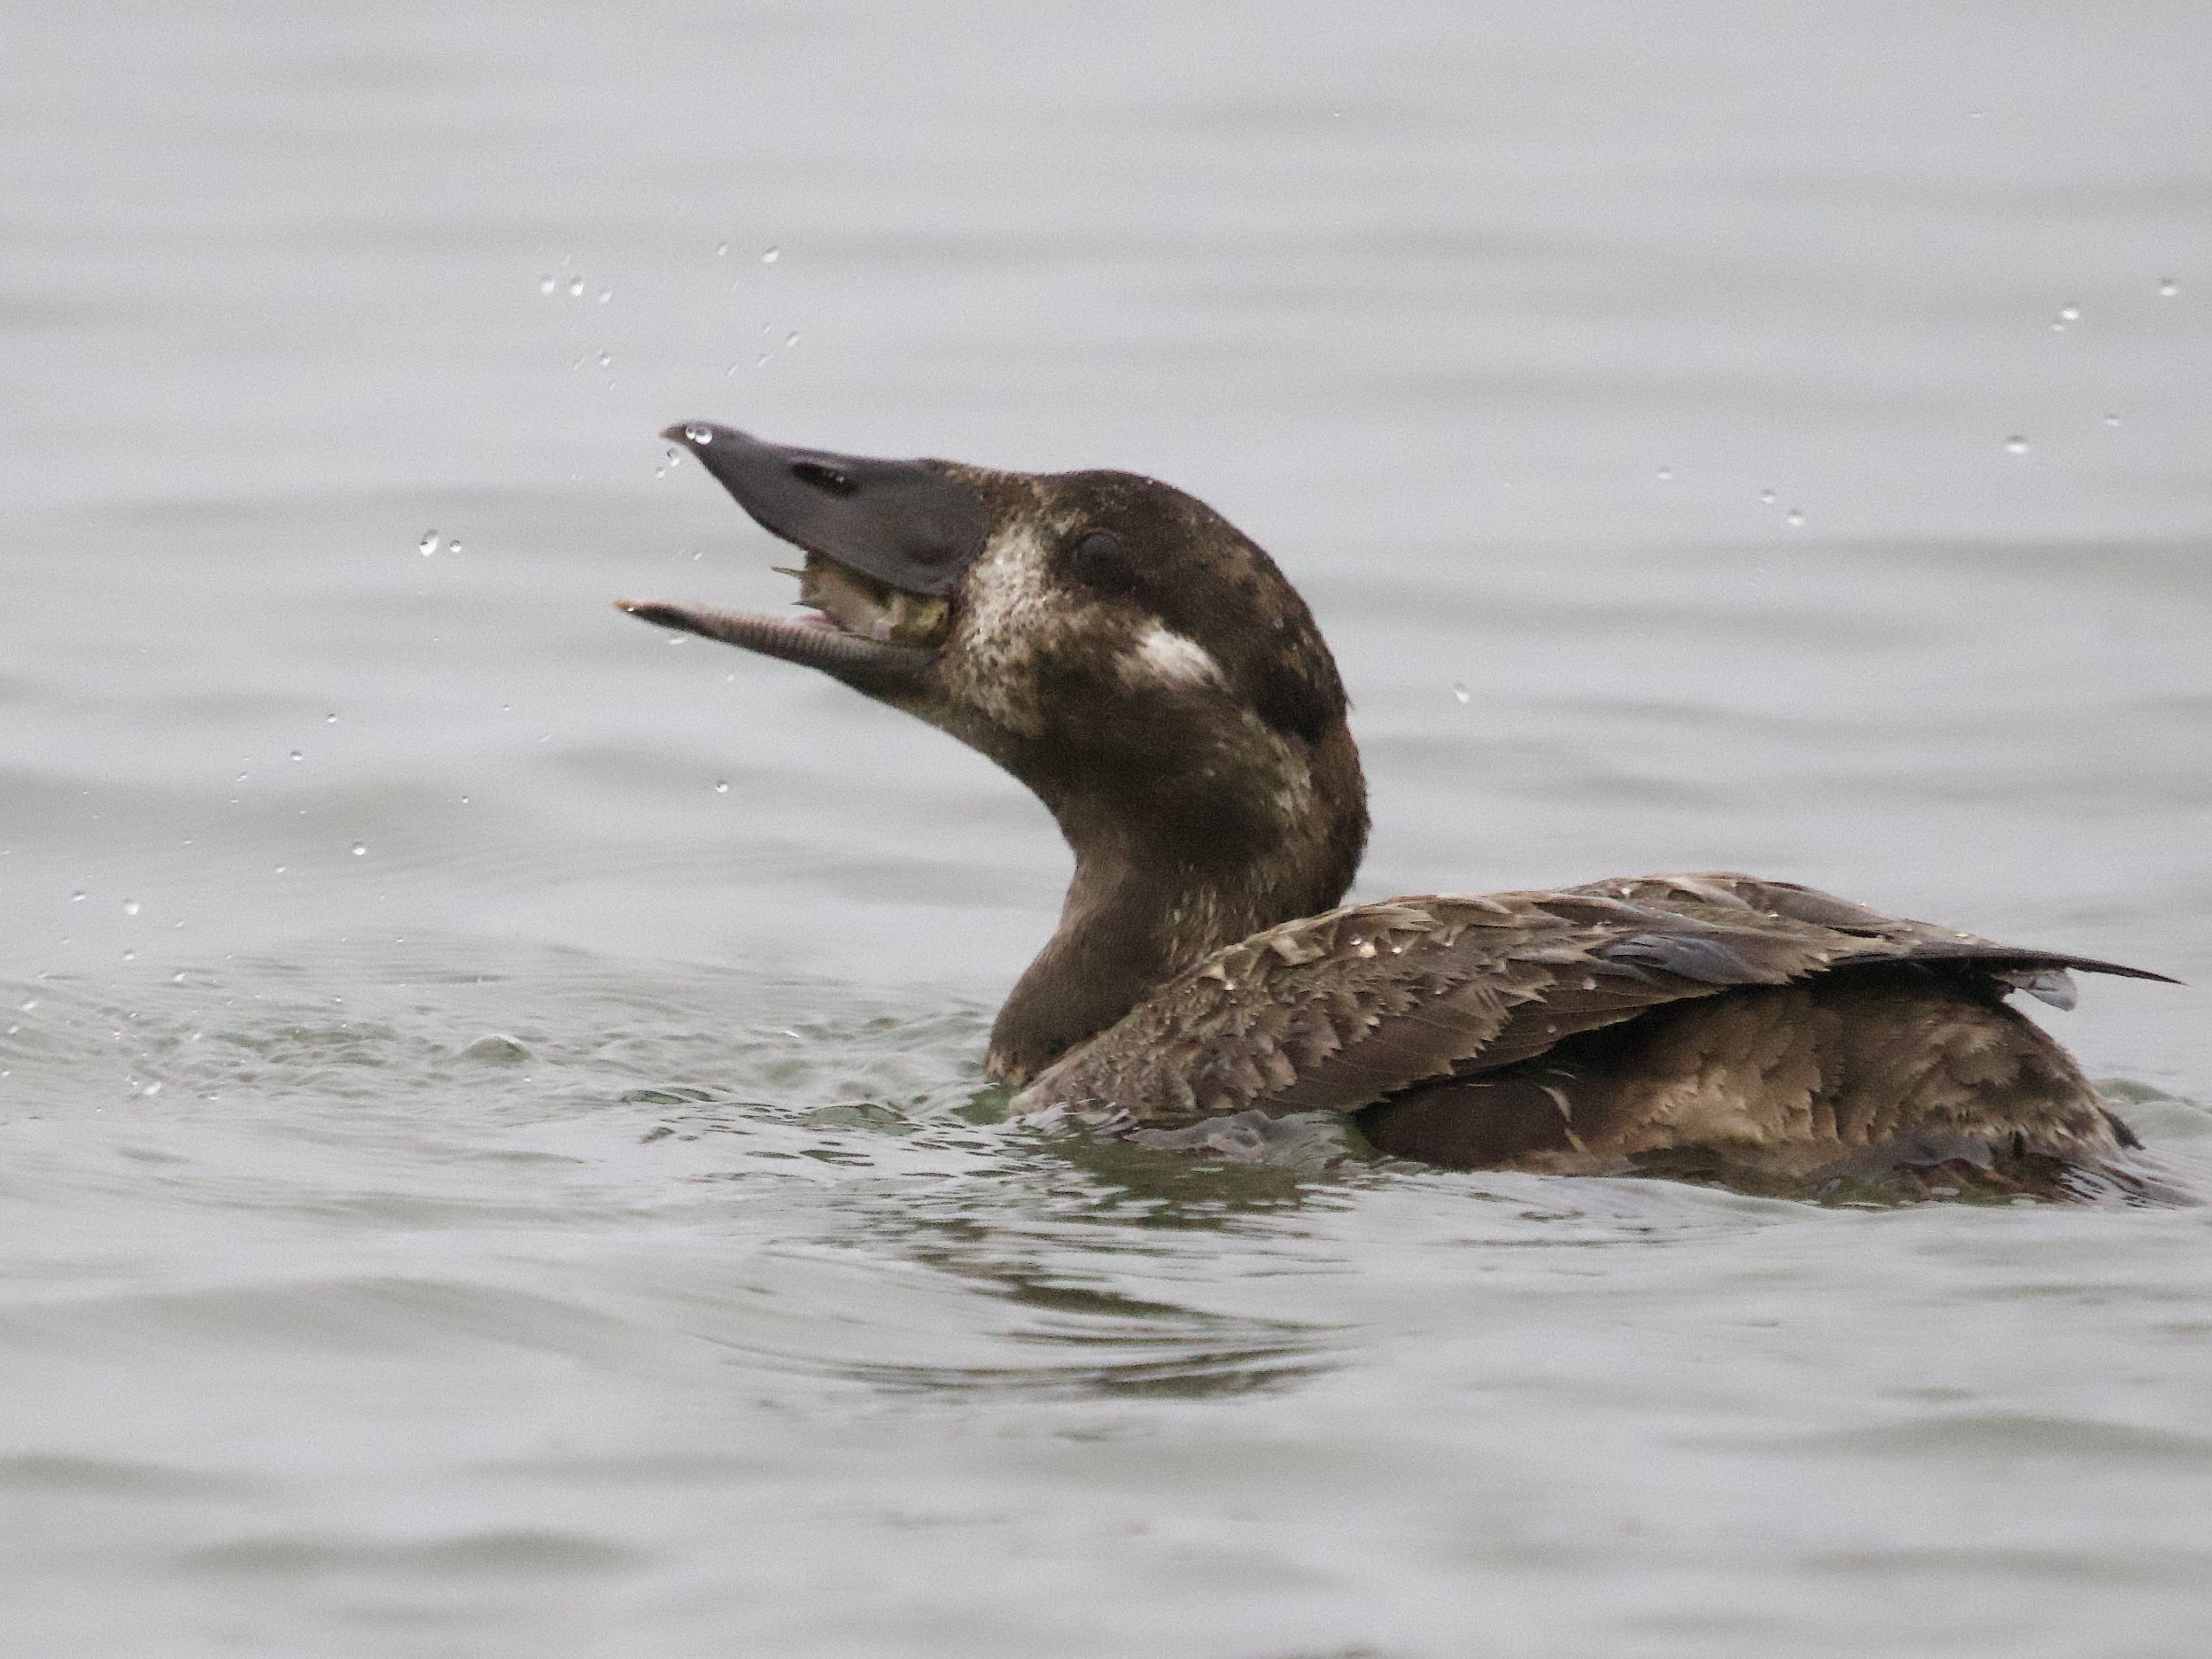 Female Surf Scoter with Mole Crab